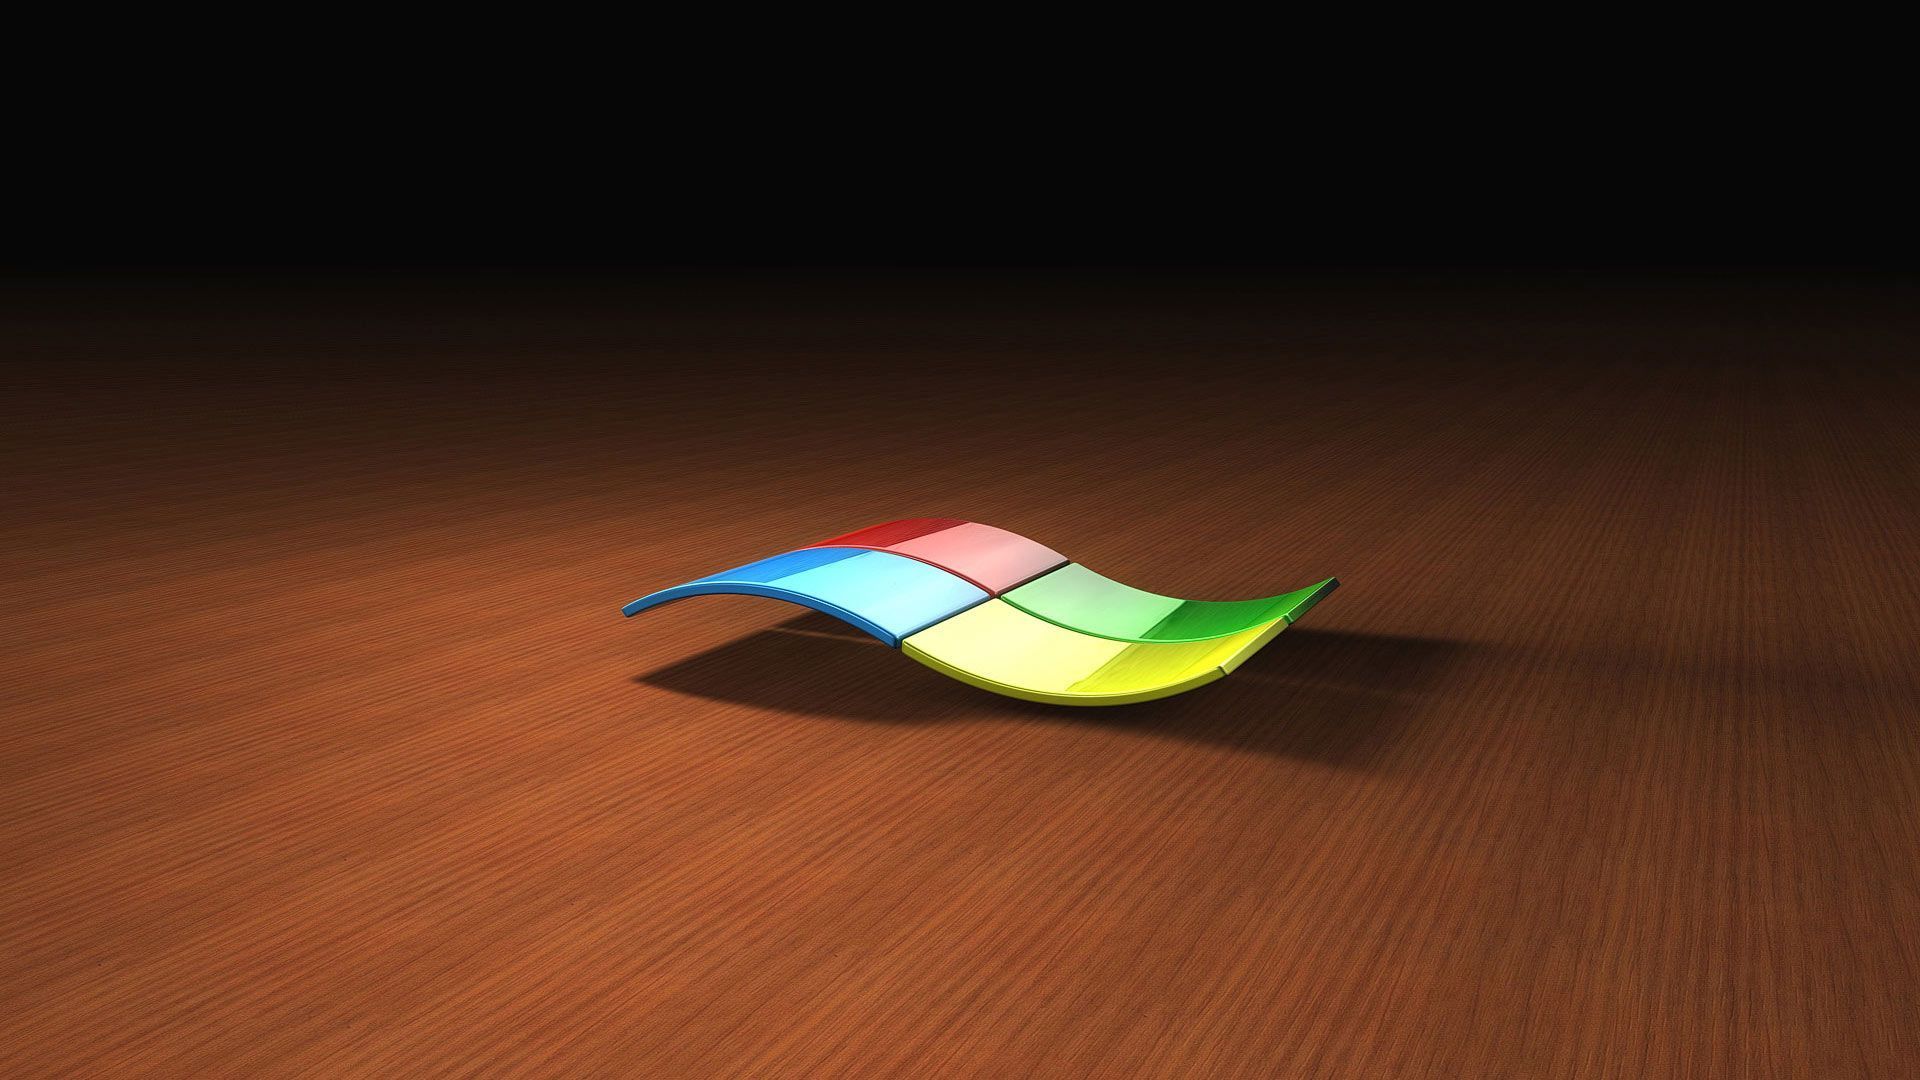 Microsoft Windows 3d Wallpaper | Wallpapers, Backgrounds, Images ...